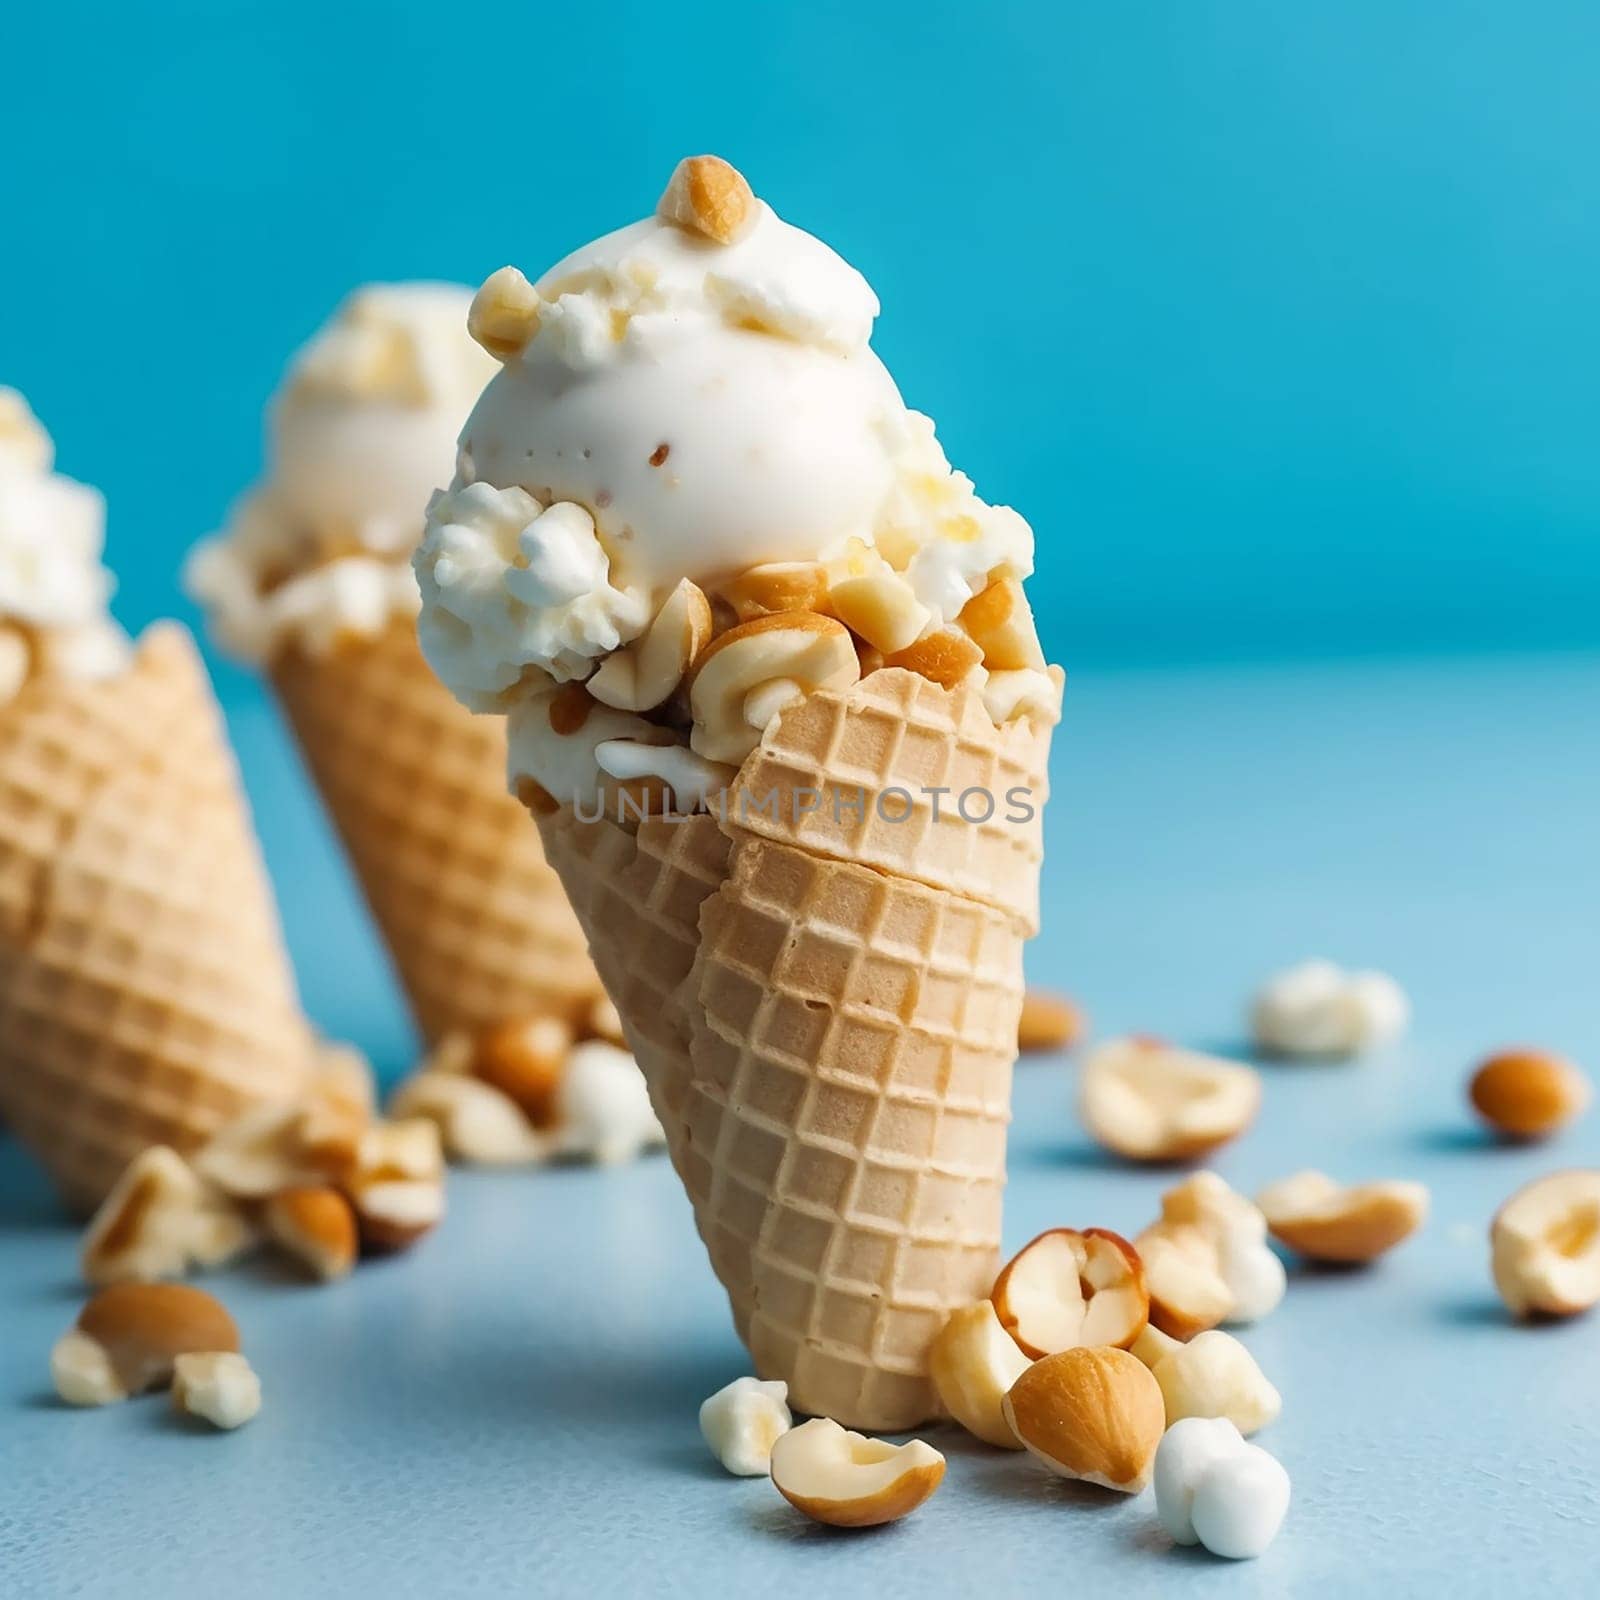 Vanilla ice cream cones with popcorn on a blue background by Hype2art